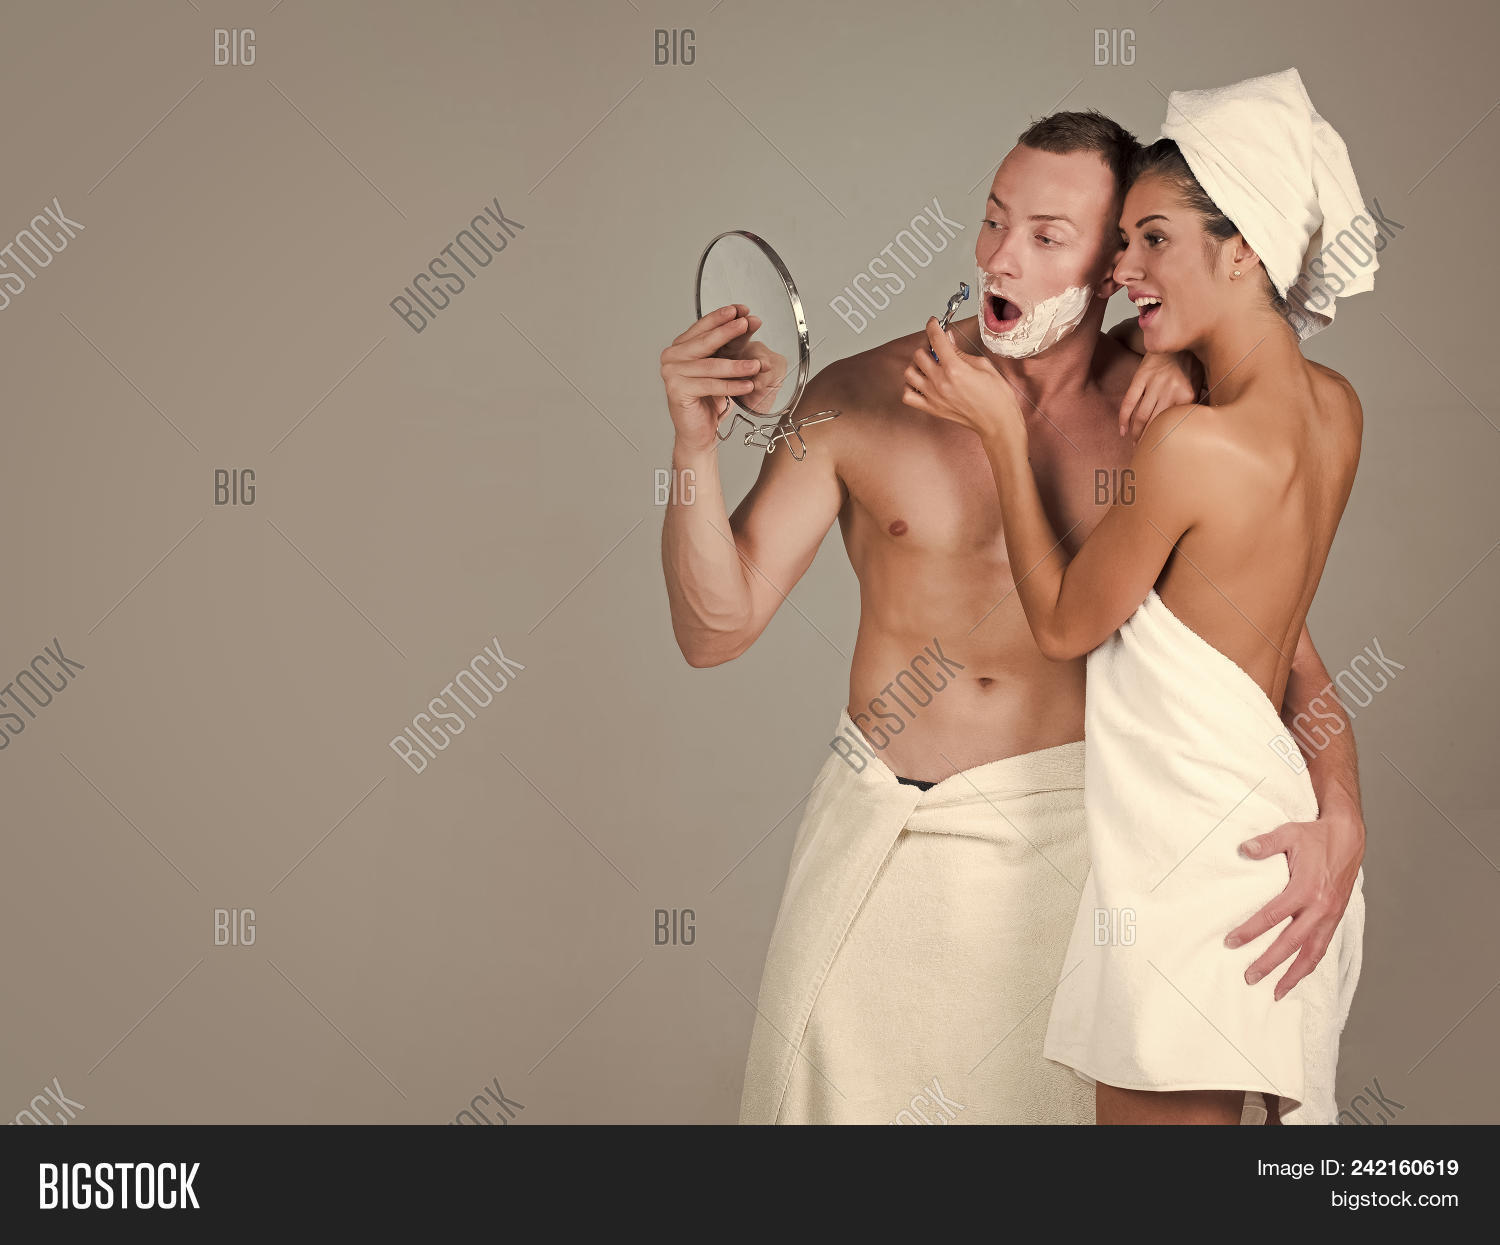 alina anderson recommends nude couples erotica pic